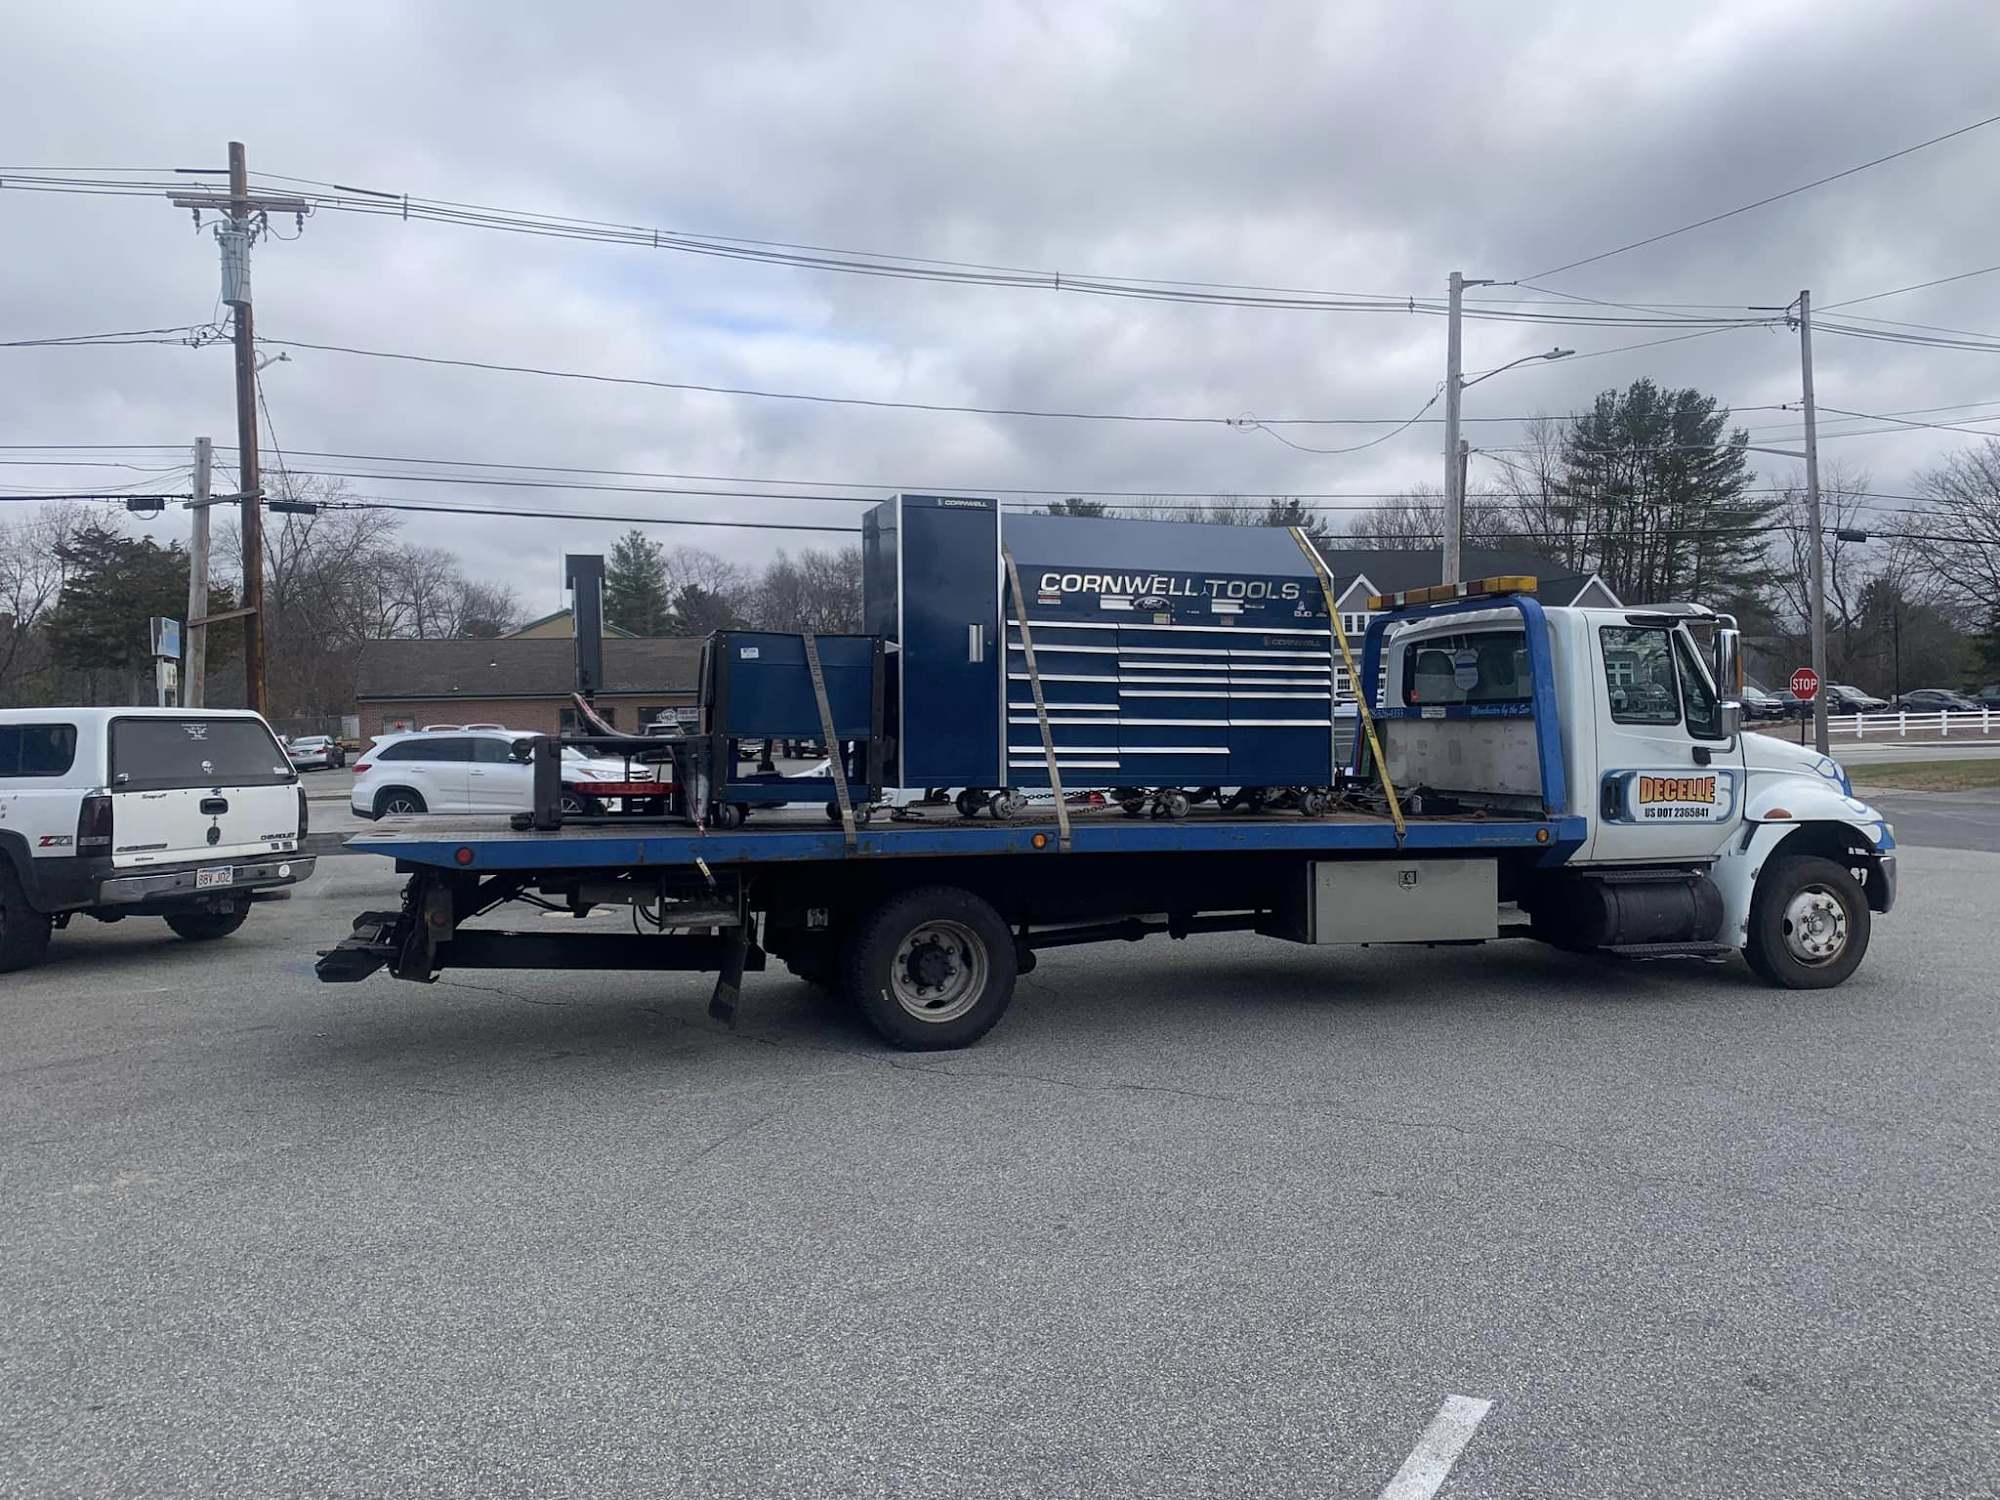 DeCelle Towing & Recovery